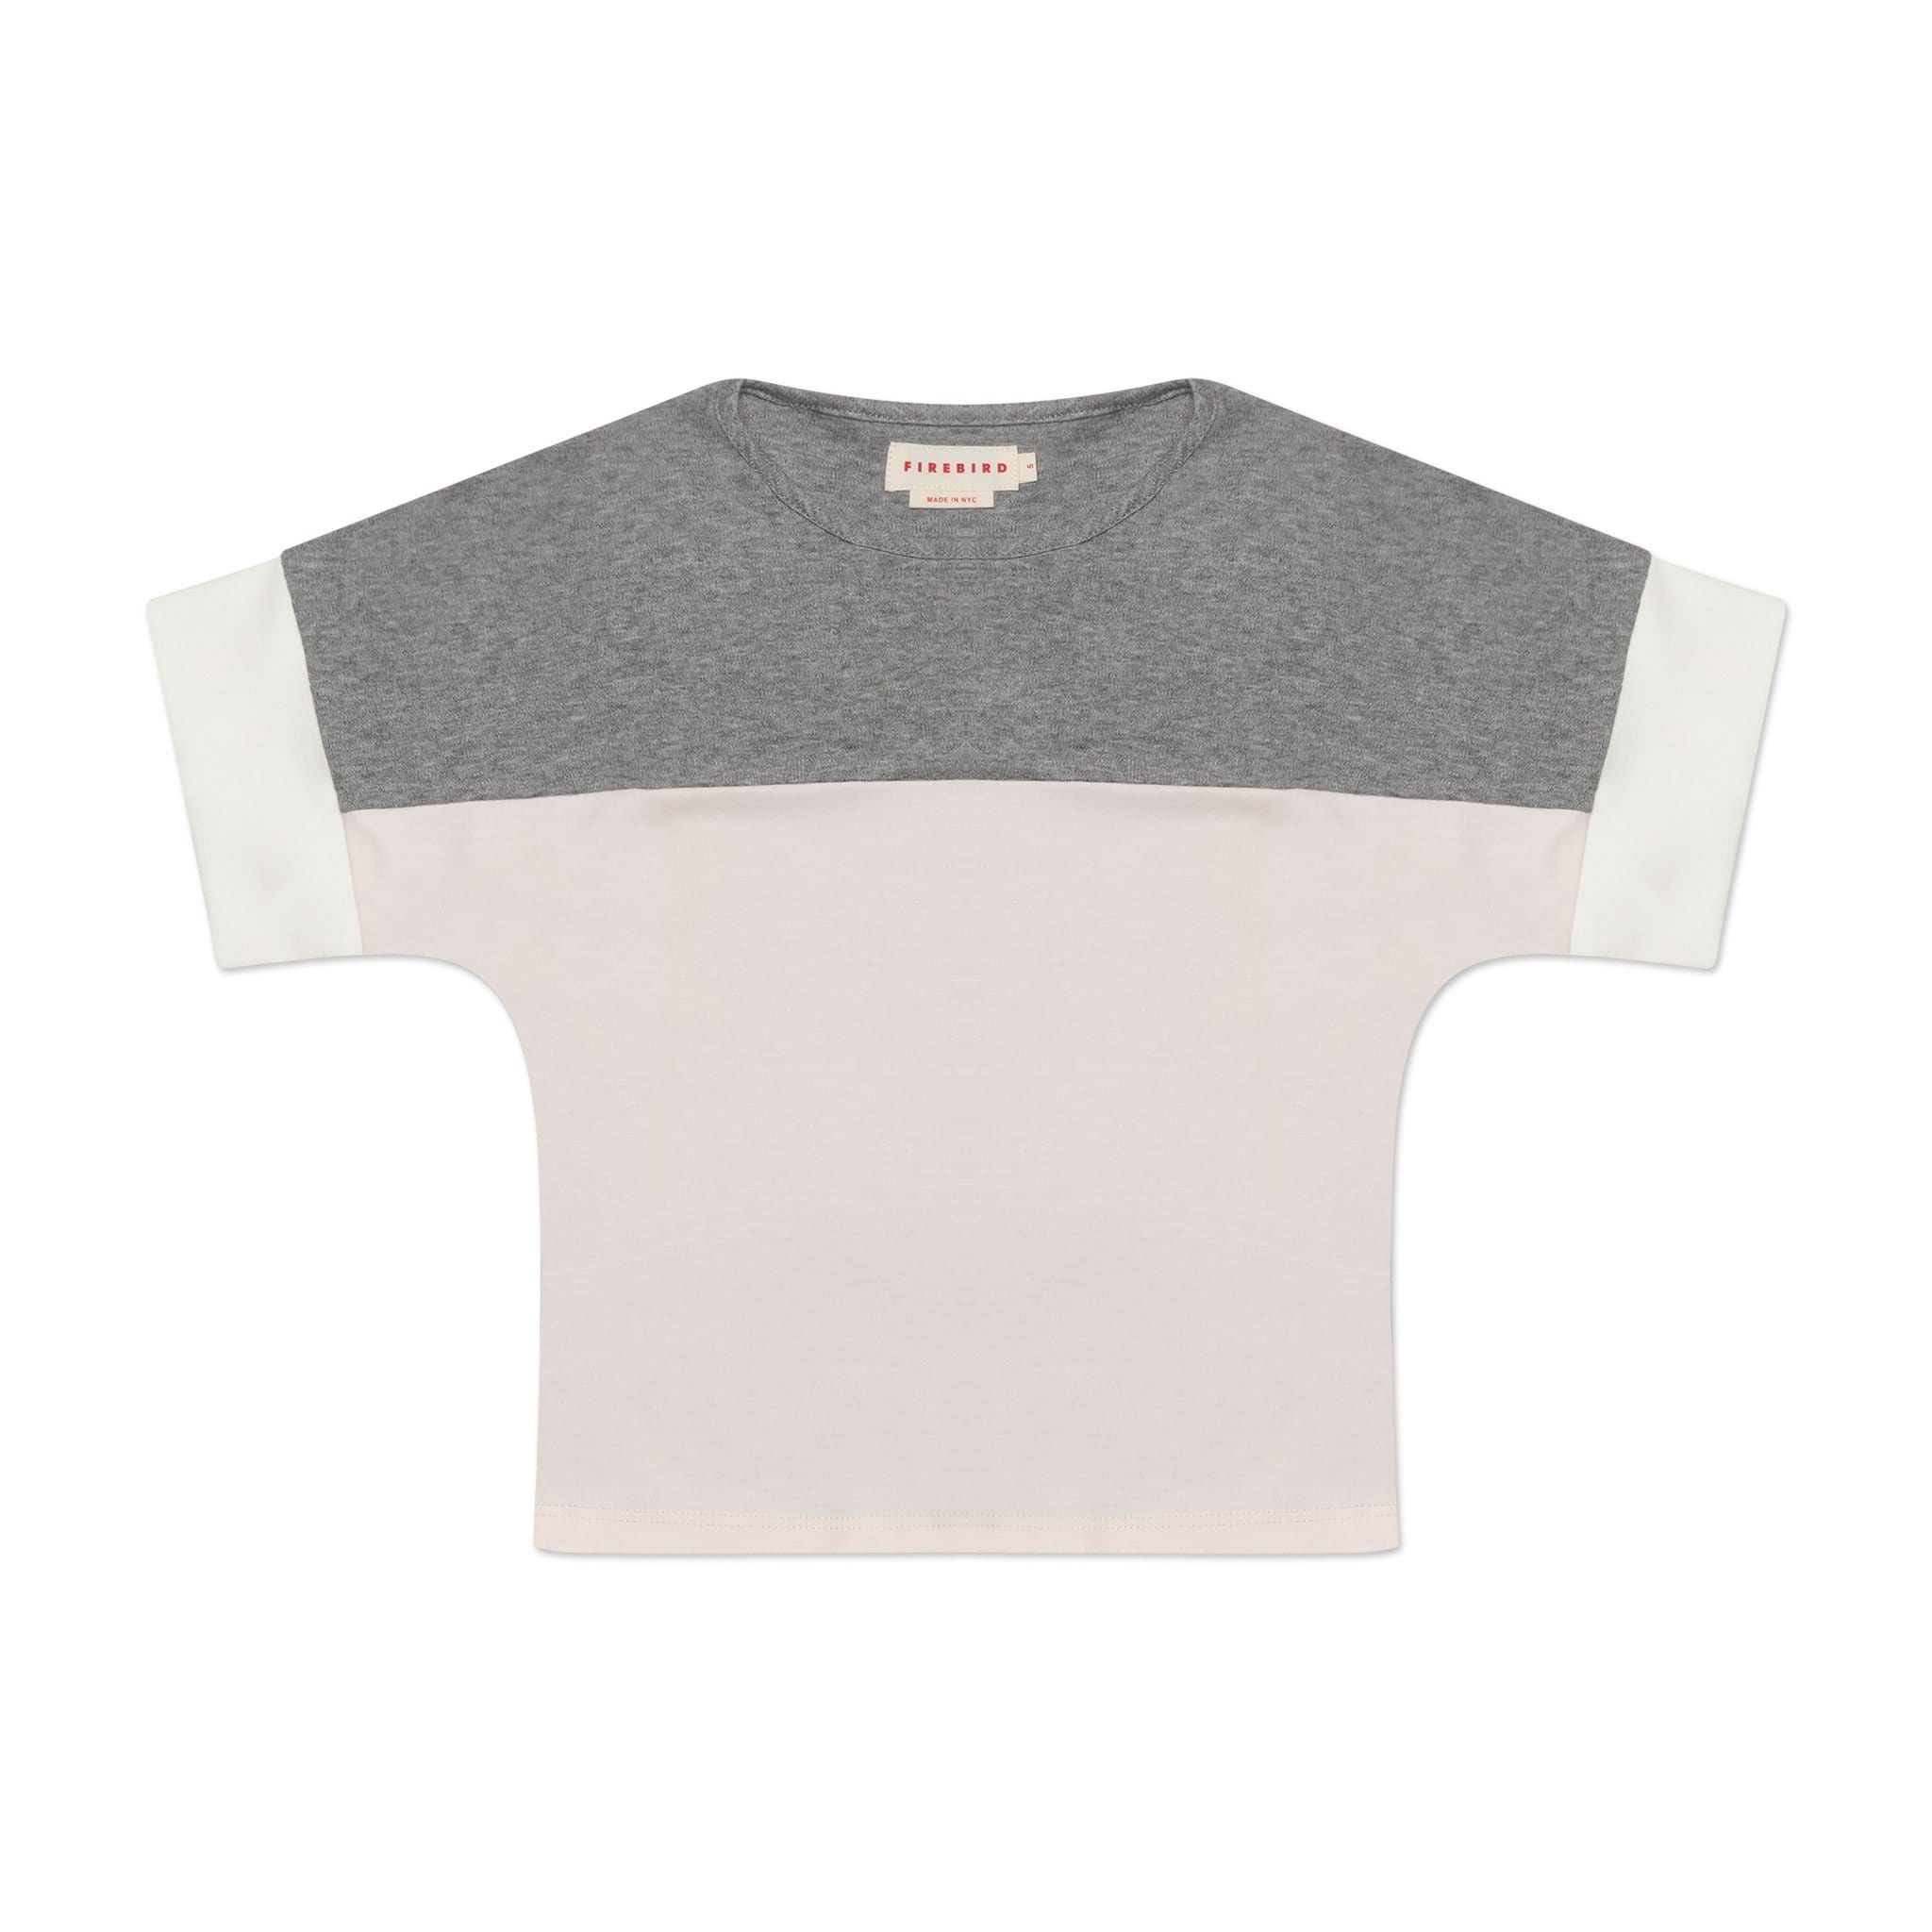 Girls tee that is durable, sustainable, and eco-friendly. Made from organic cotton. 